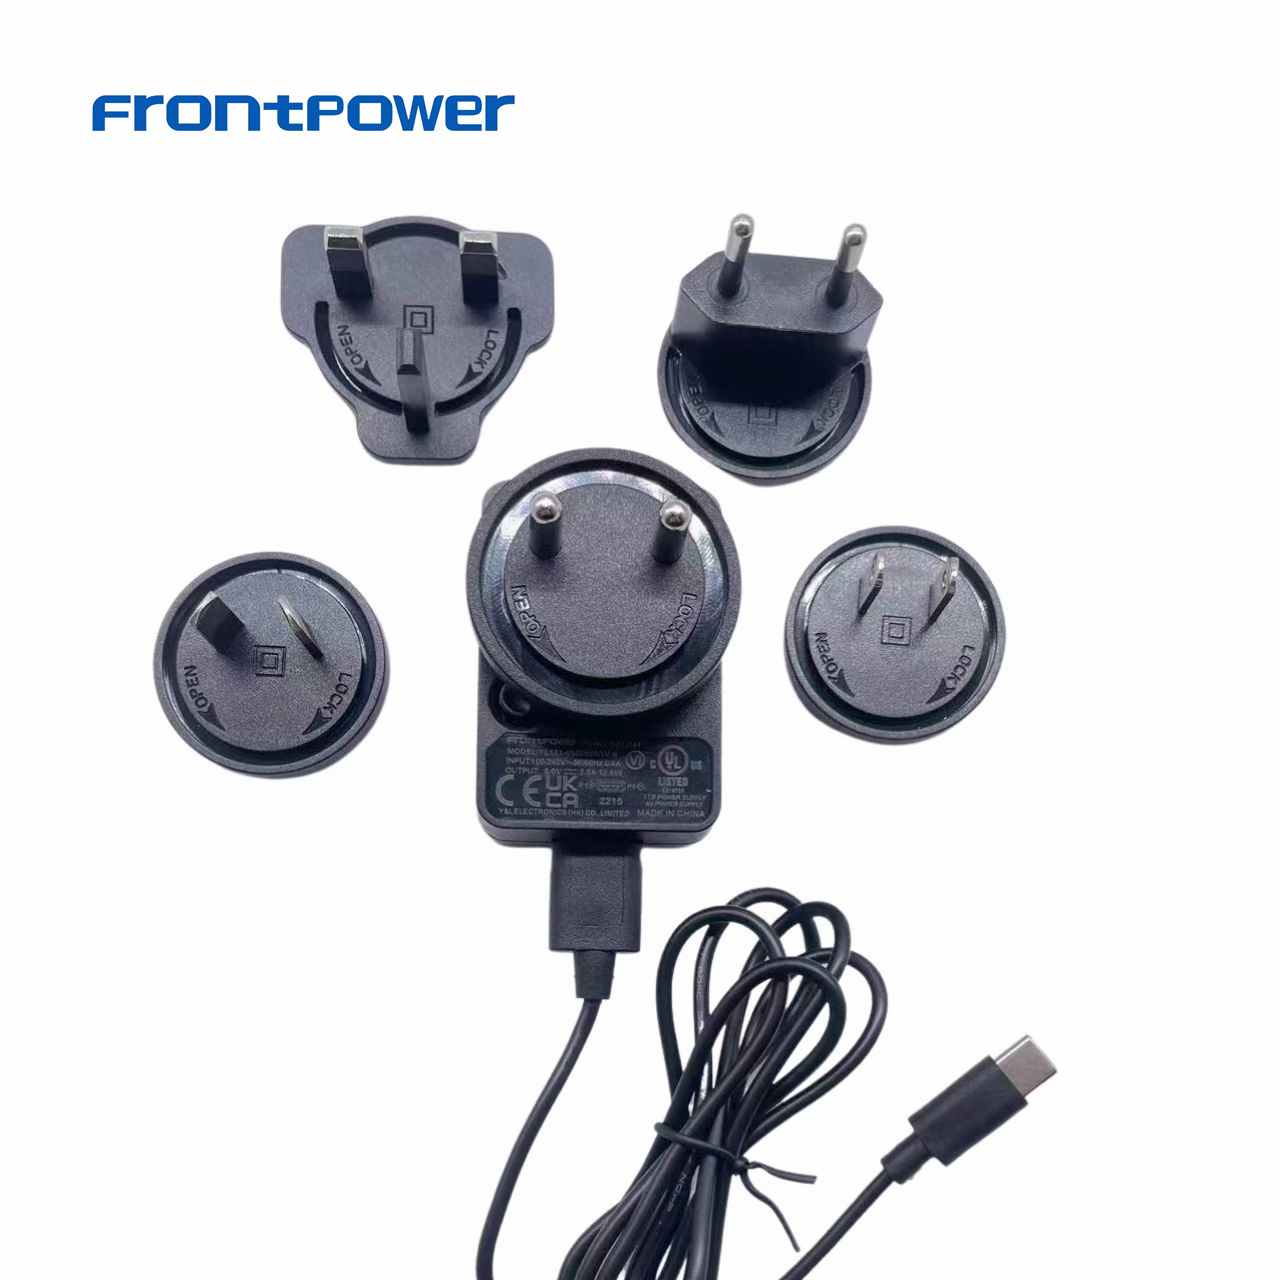 Frontpower 5V2A 5V 2.5A US EU UK AU INDIA CCC KR JP PLUG interchangeable power charger 5V 3A power adaptor with UL CE GS BIS